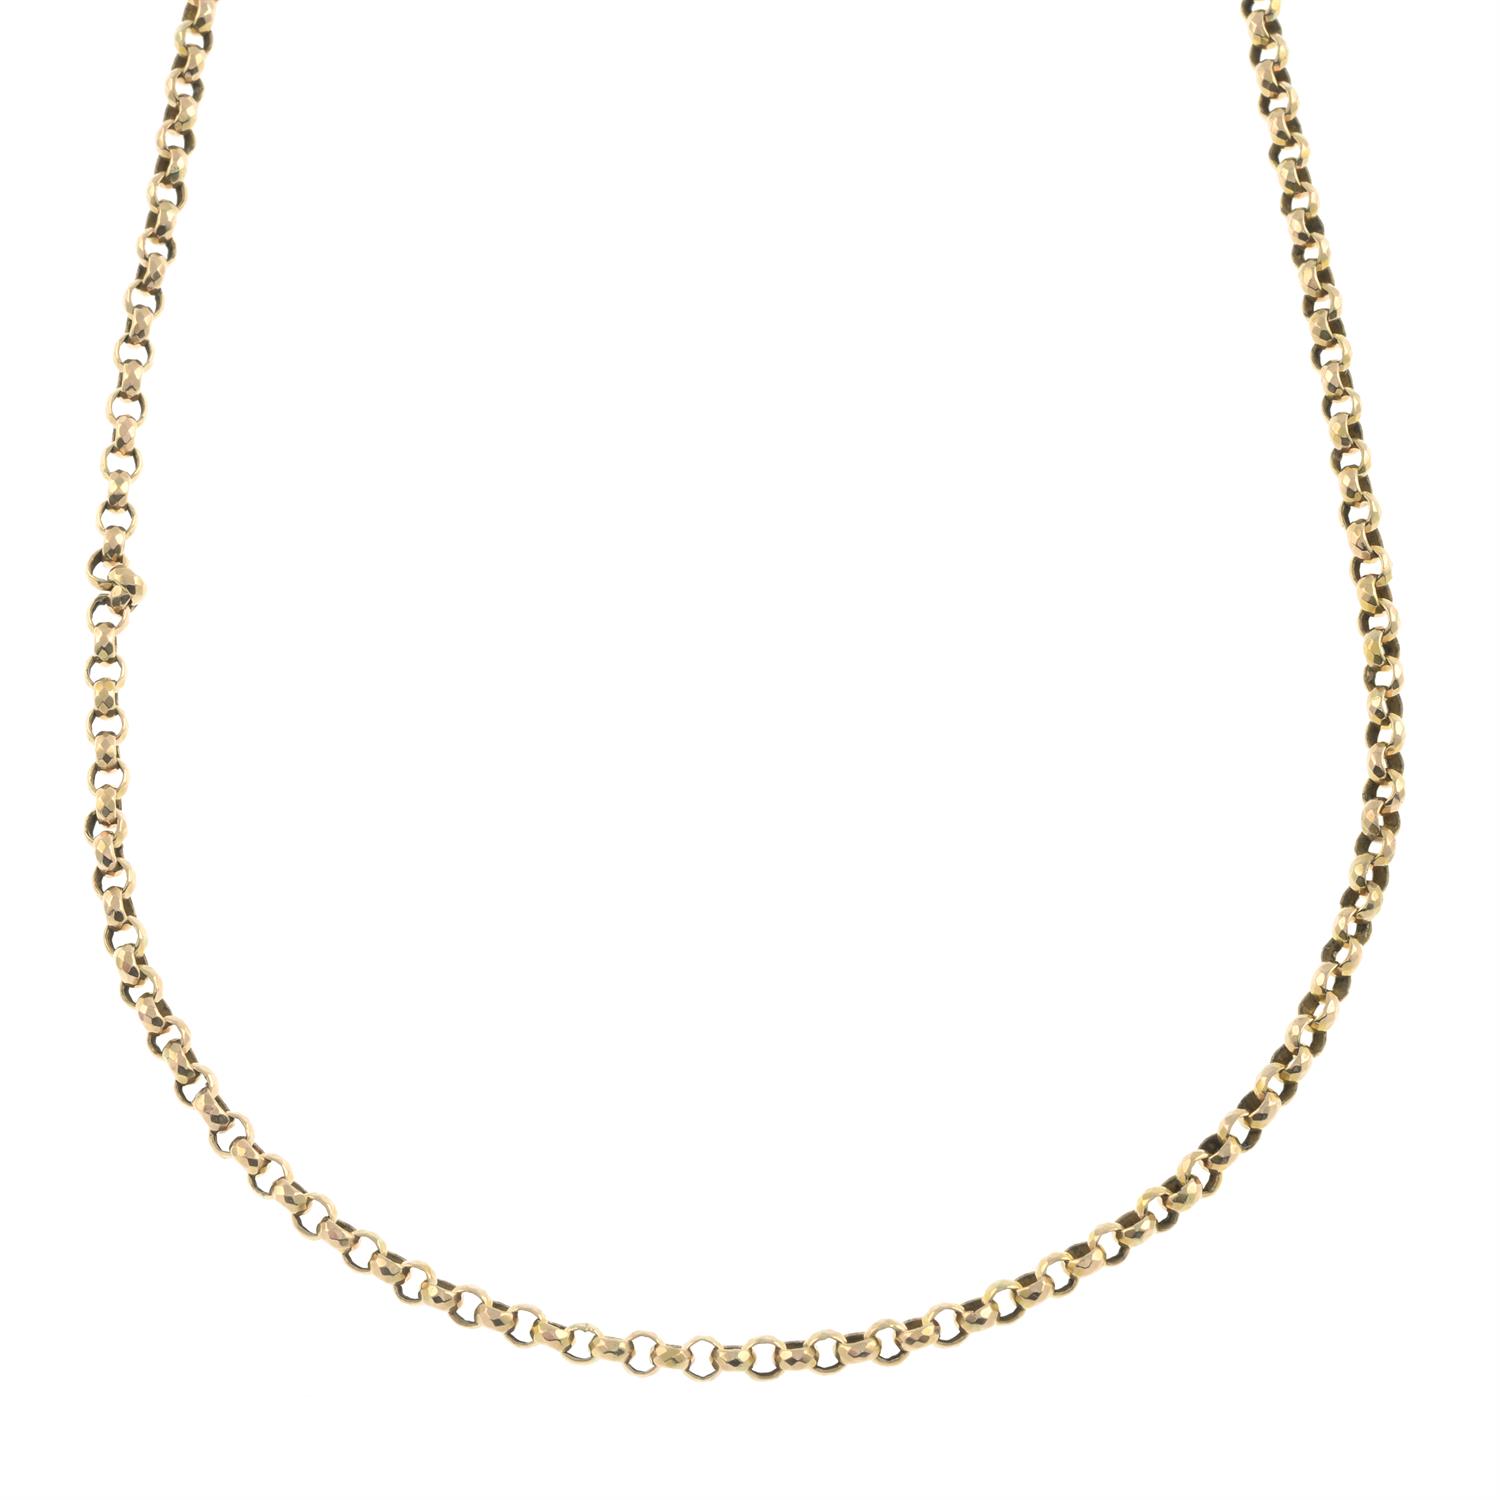 Late Victorian 9ct gold belcher-link necklace